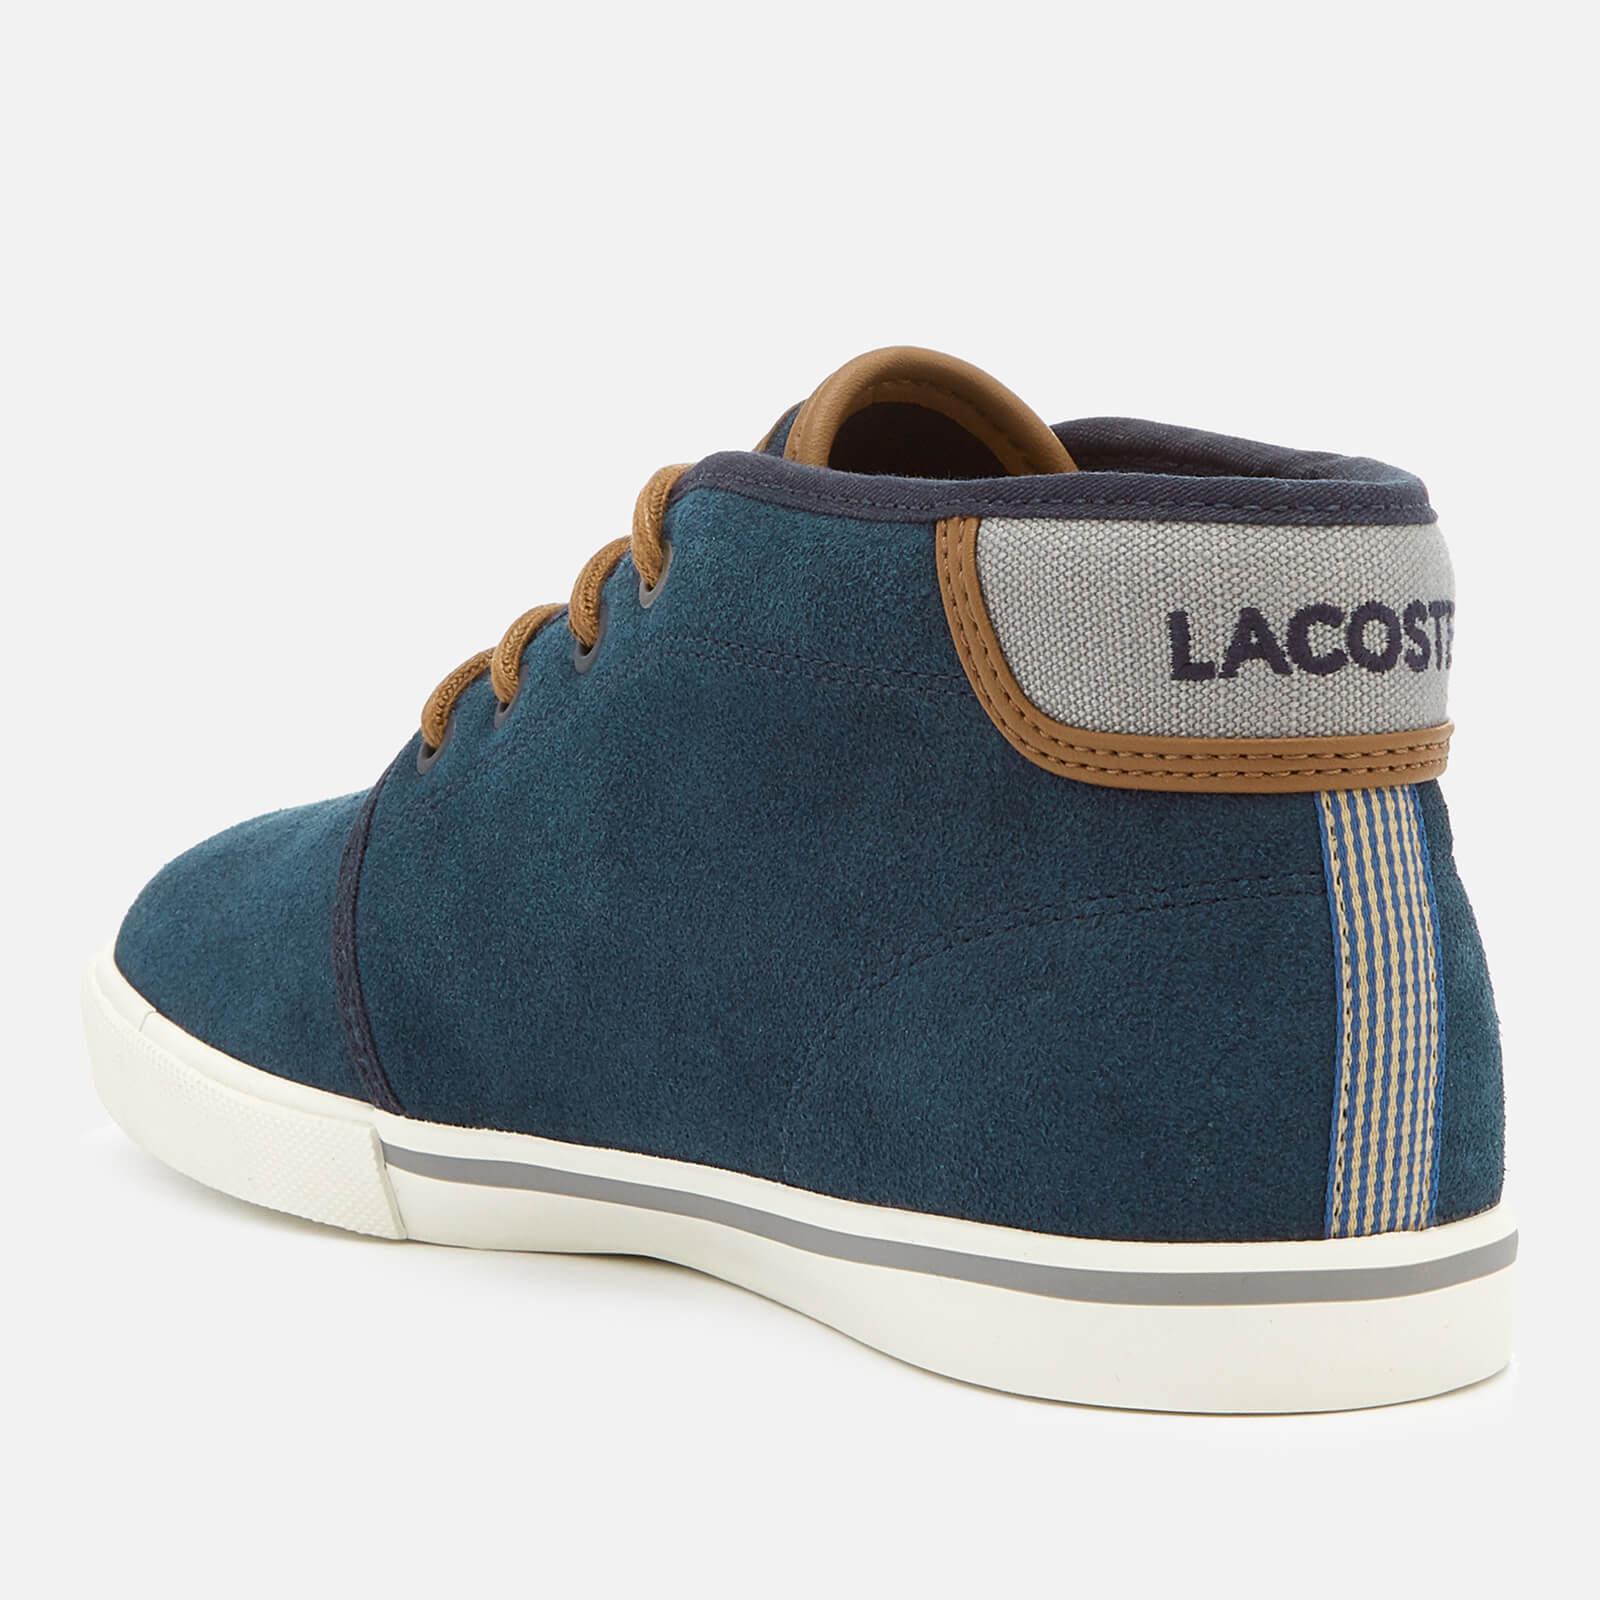 Lacoste Ampthill 318 1 Suede Chukka Boots in Blue for Men - Lyst